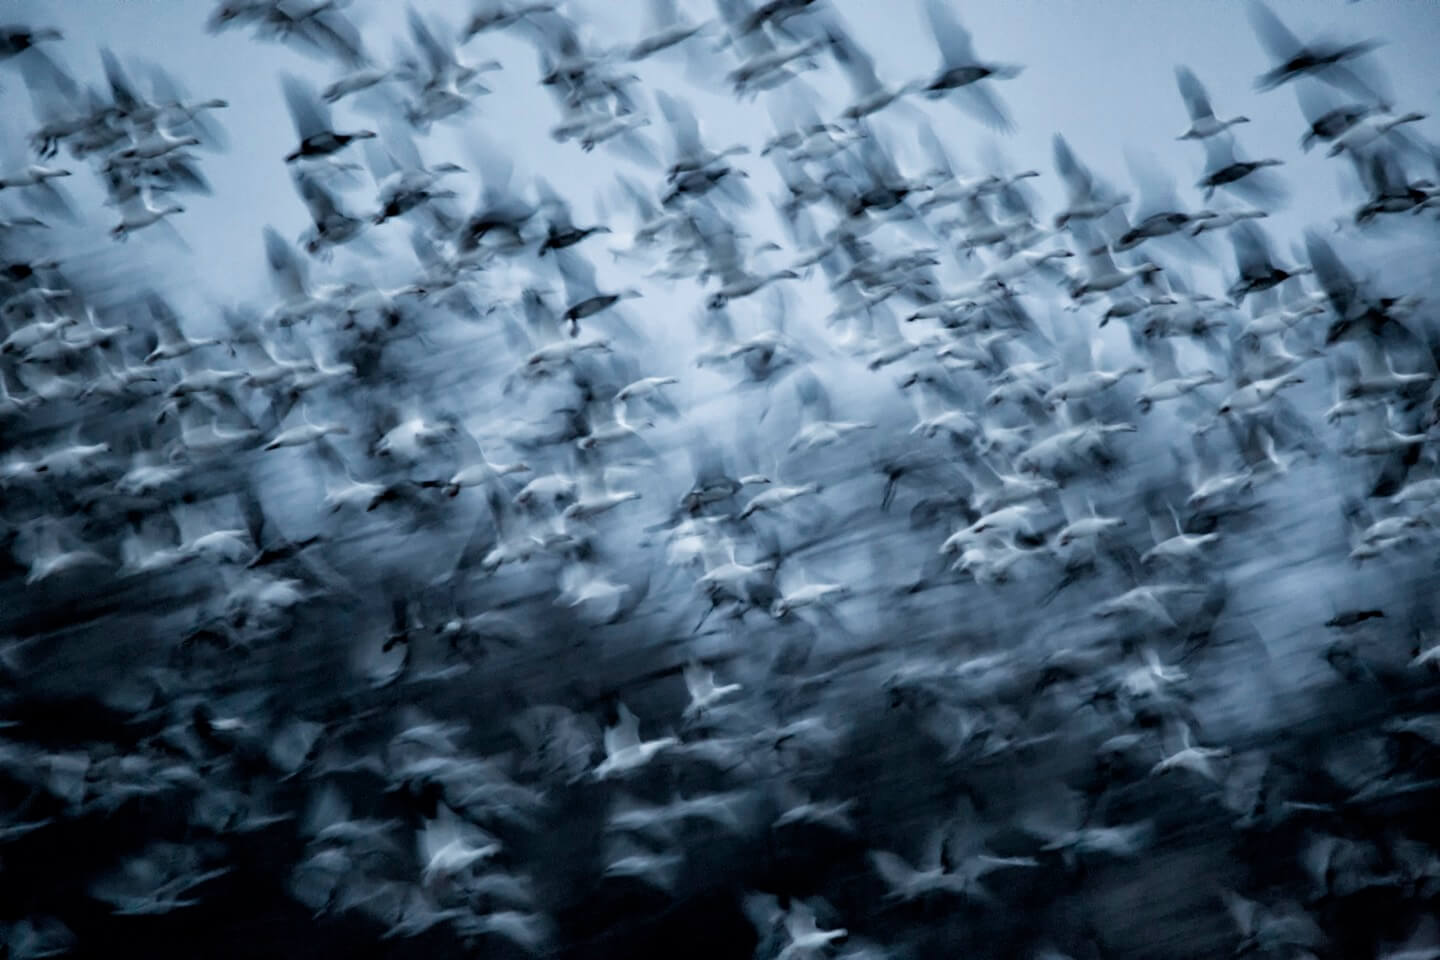 Snow Geese Take Flight - Taken by Marc Bacon using a full-frame Canon 6D